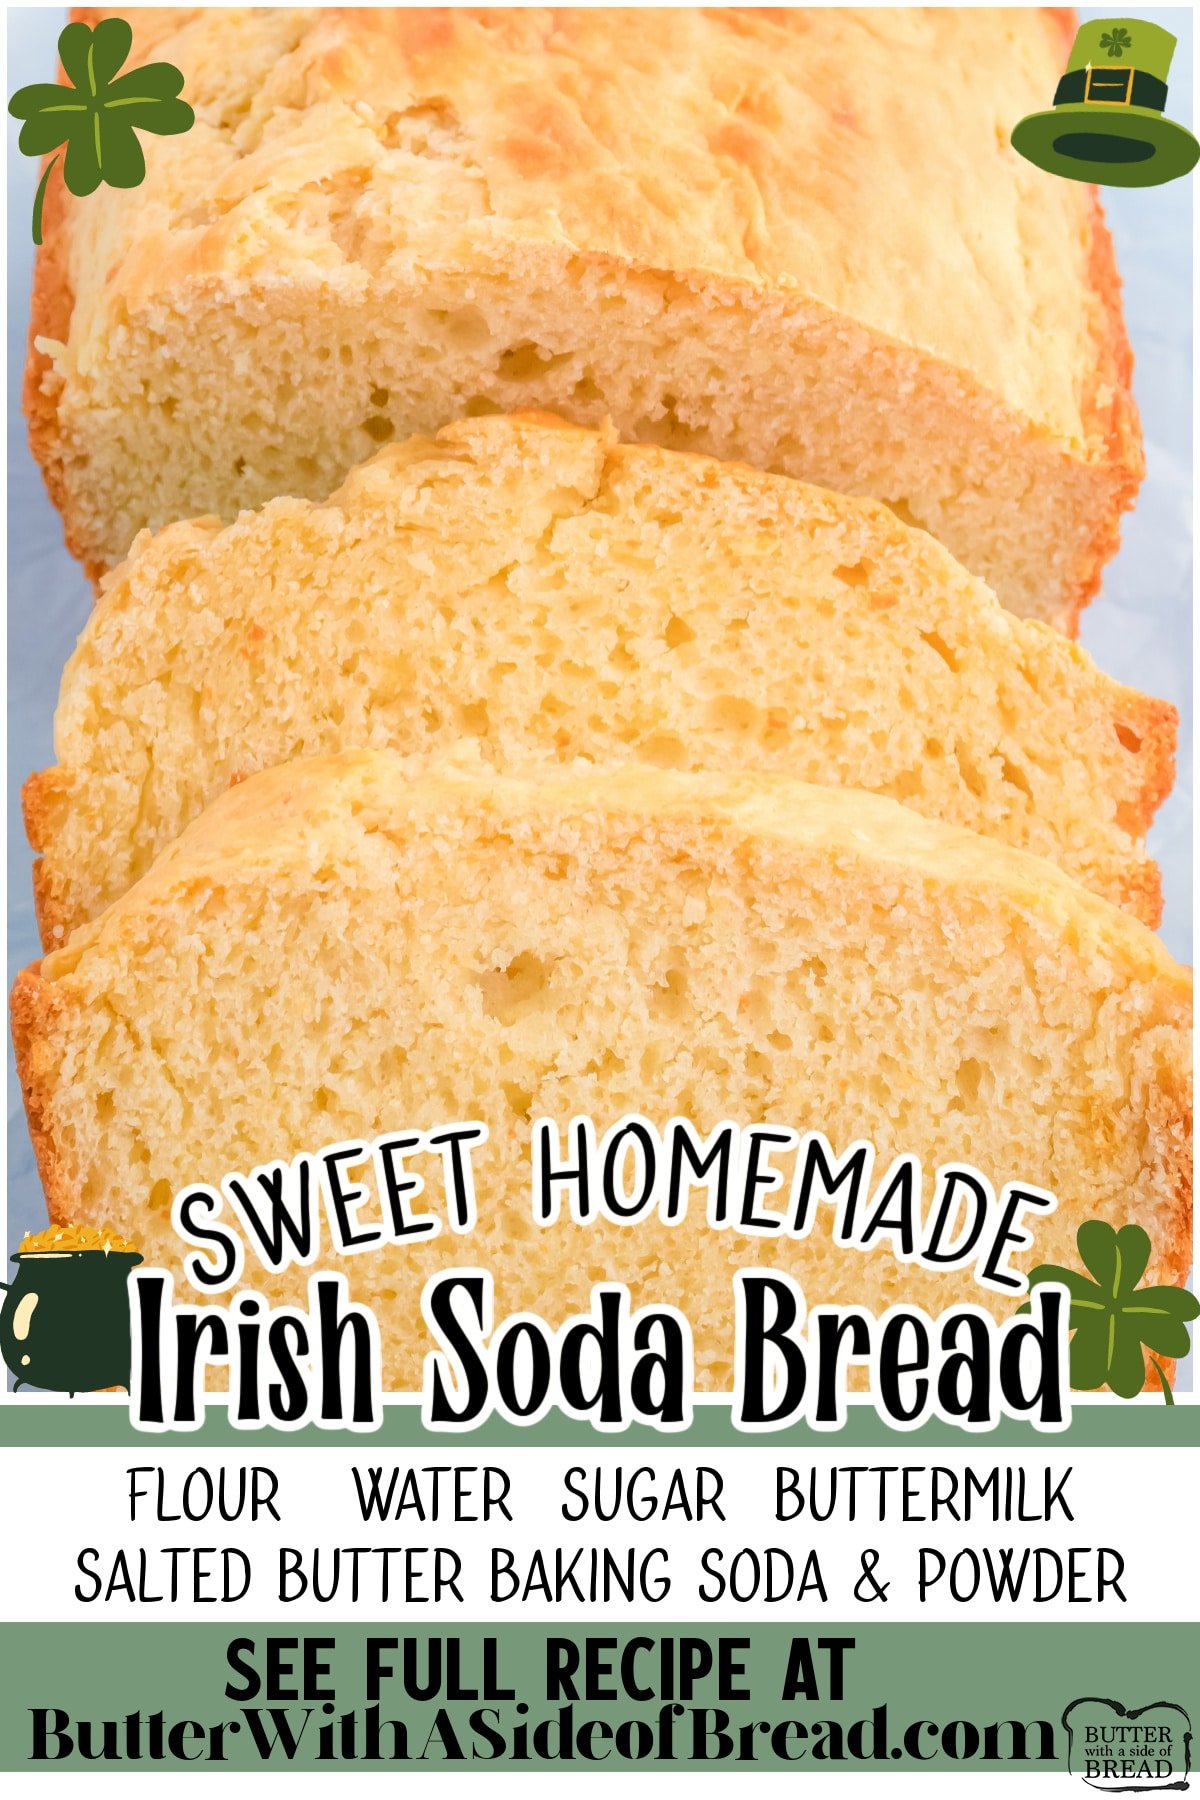 Sweet Irish Soda Bread is a fun twist on classic St. Patrick's day recipe! This easy Irish soda bread is more sweet and moist than traditional fare and is lovely served warm with butter.